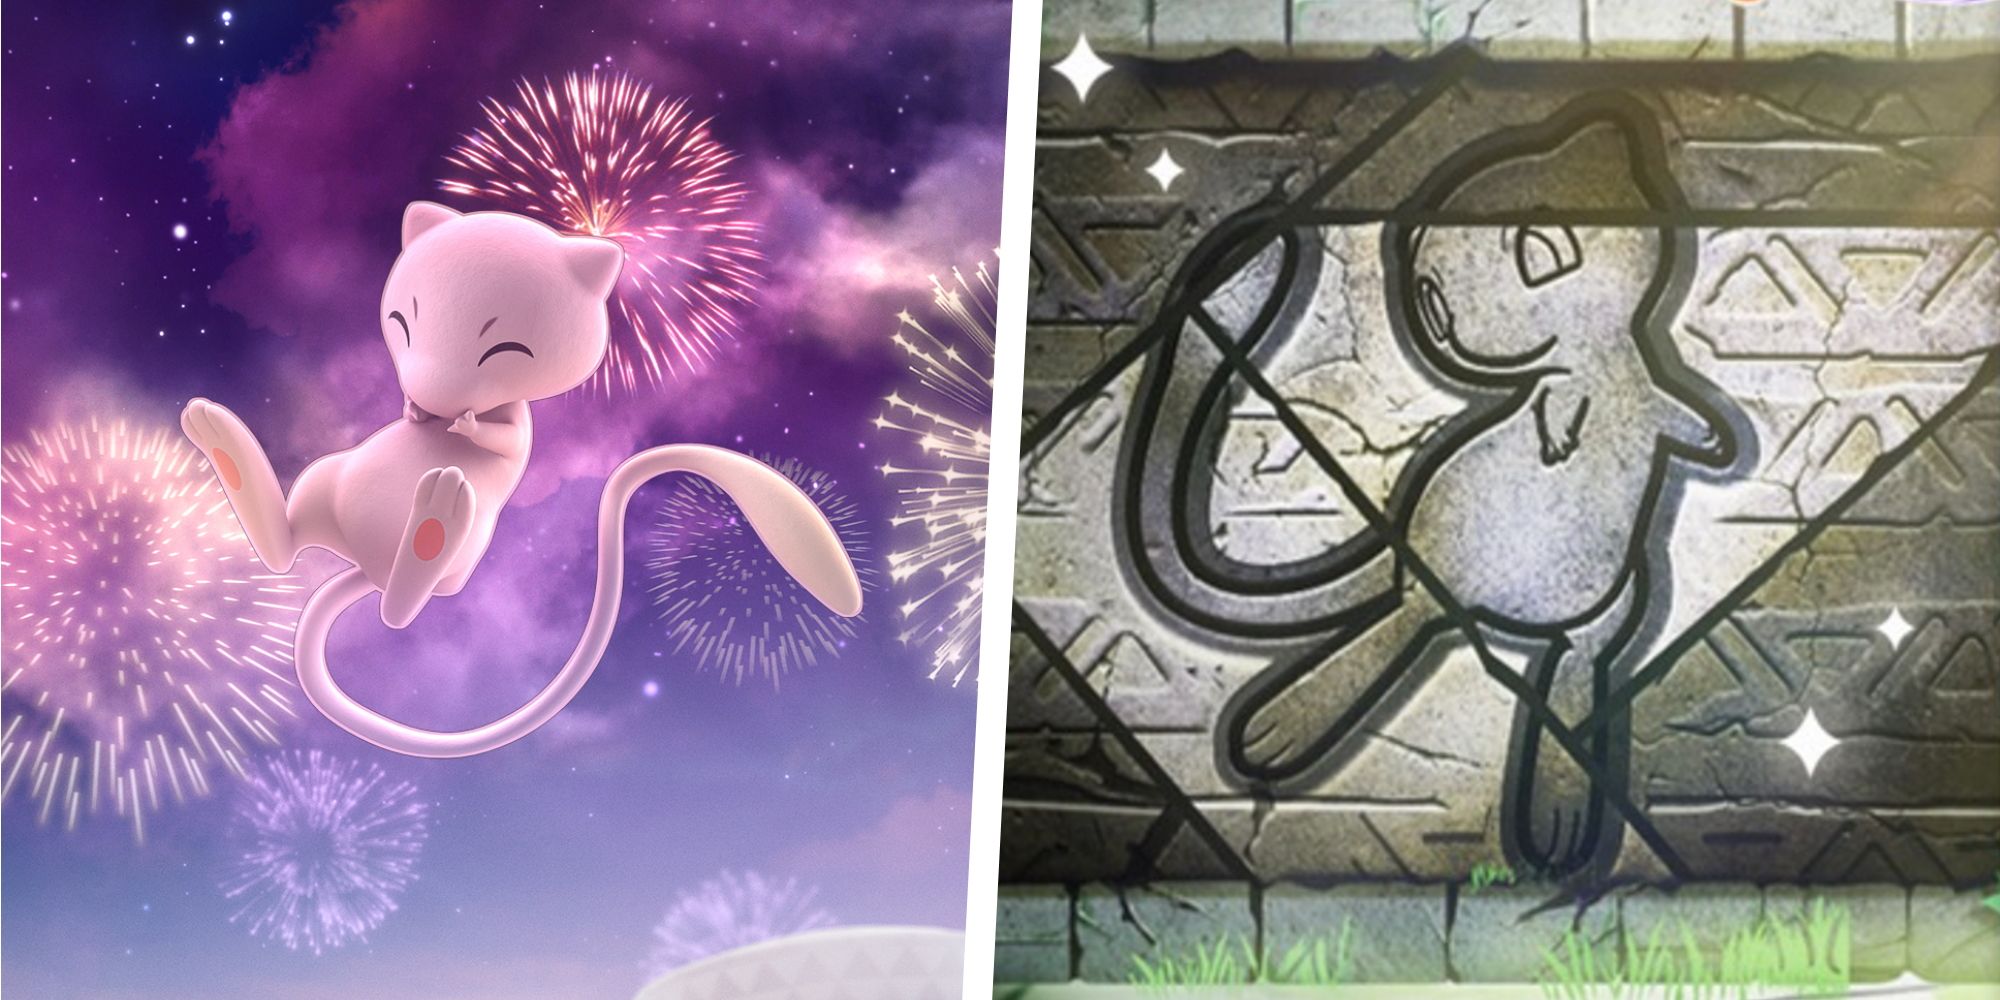 An image of Mew in a firework filled sky split with an image of Mew's Mural